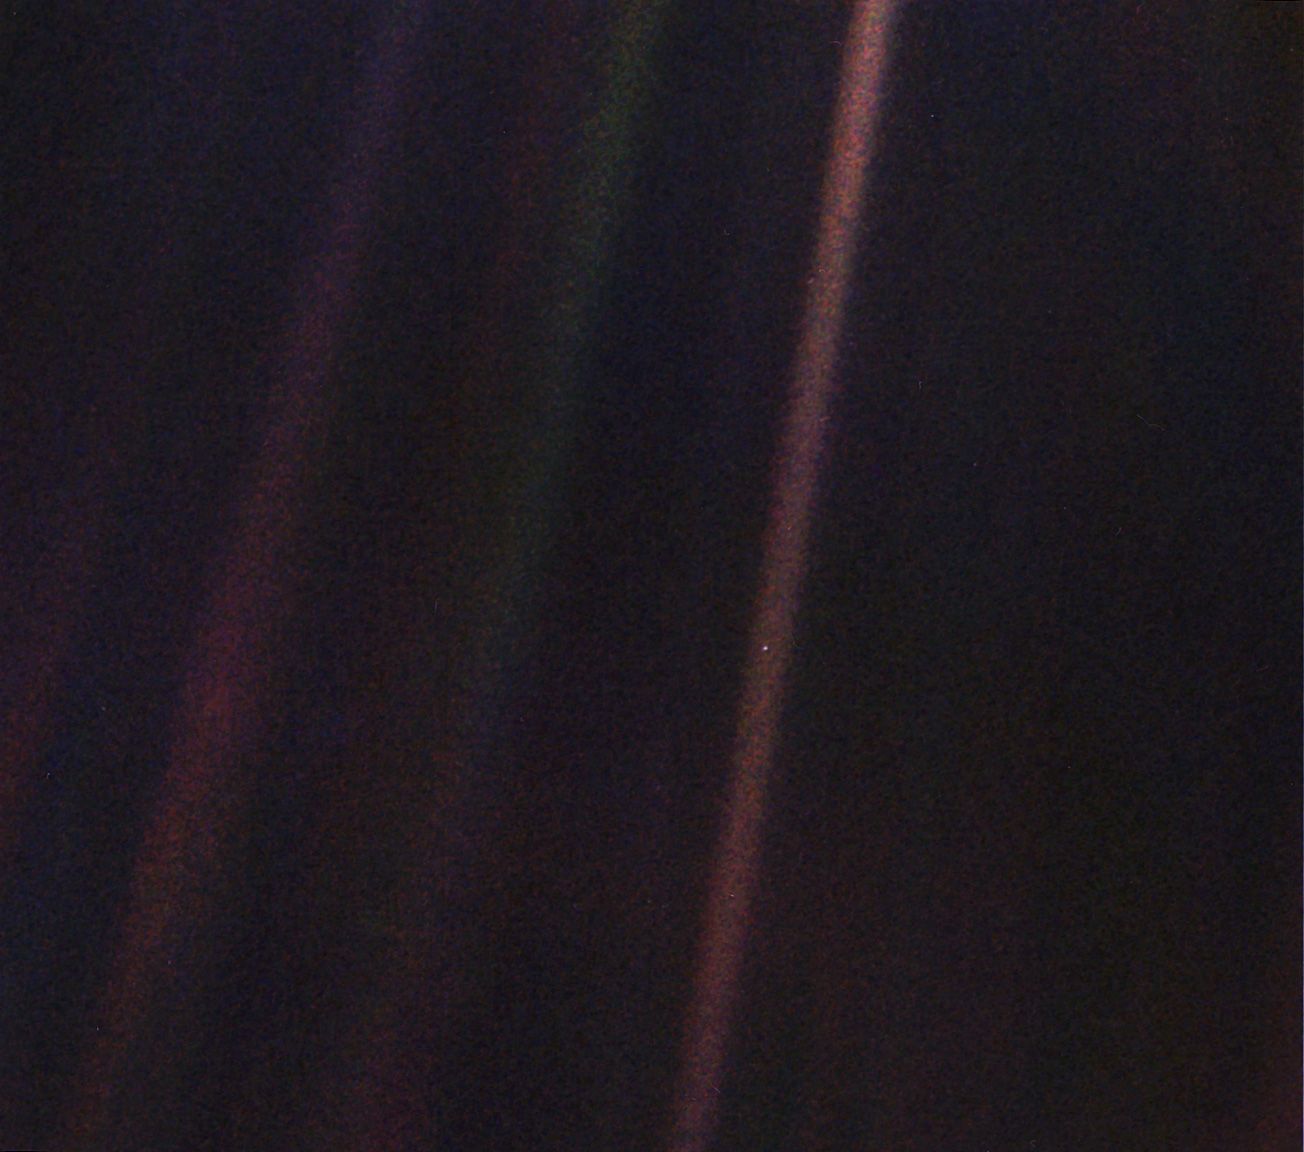 Earth as a small blue dot in a fuzzy beam of light.